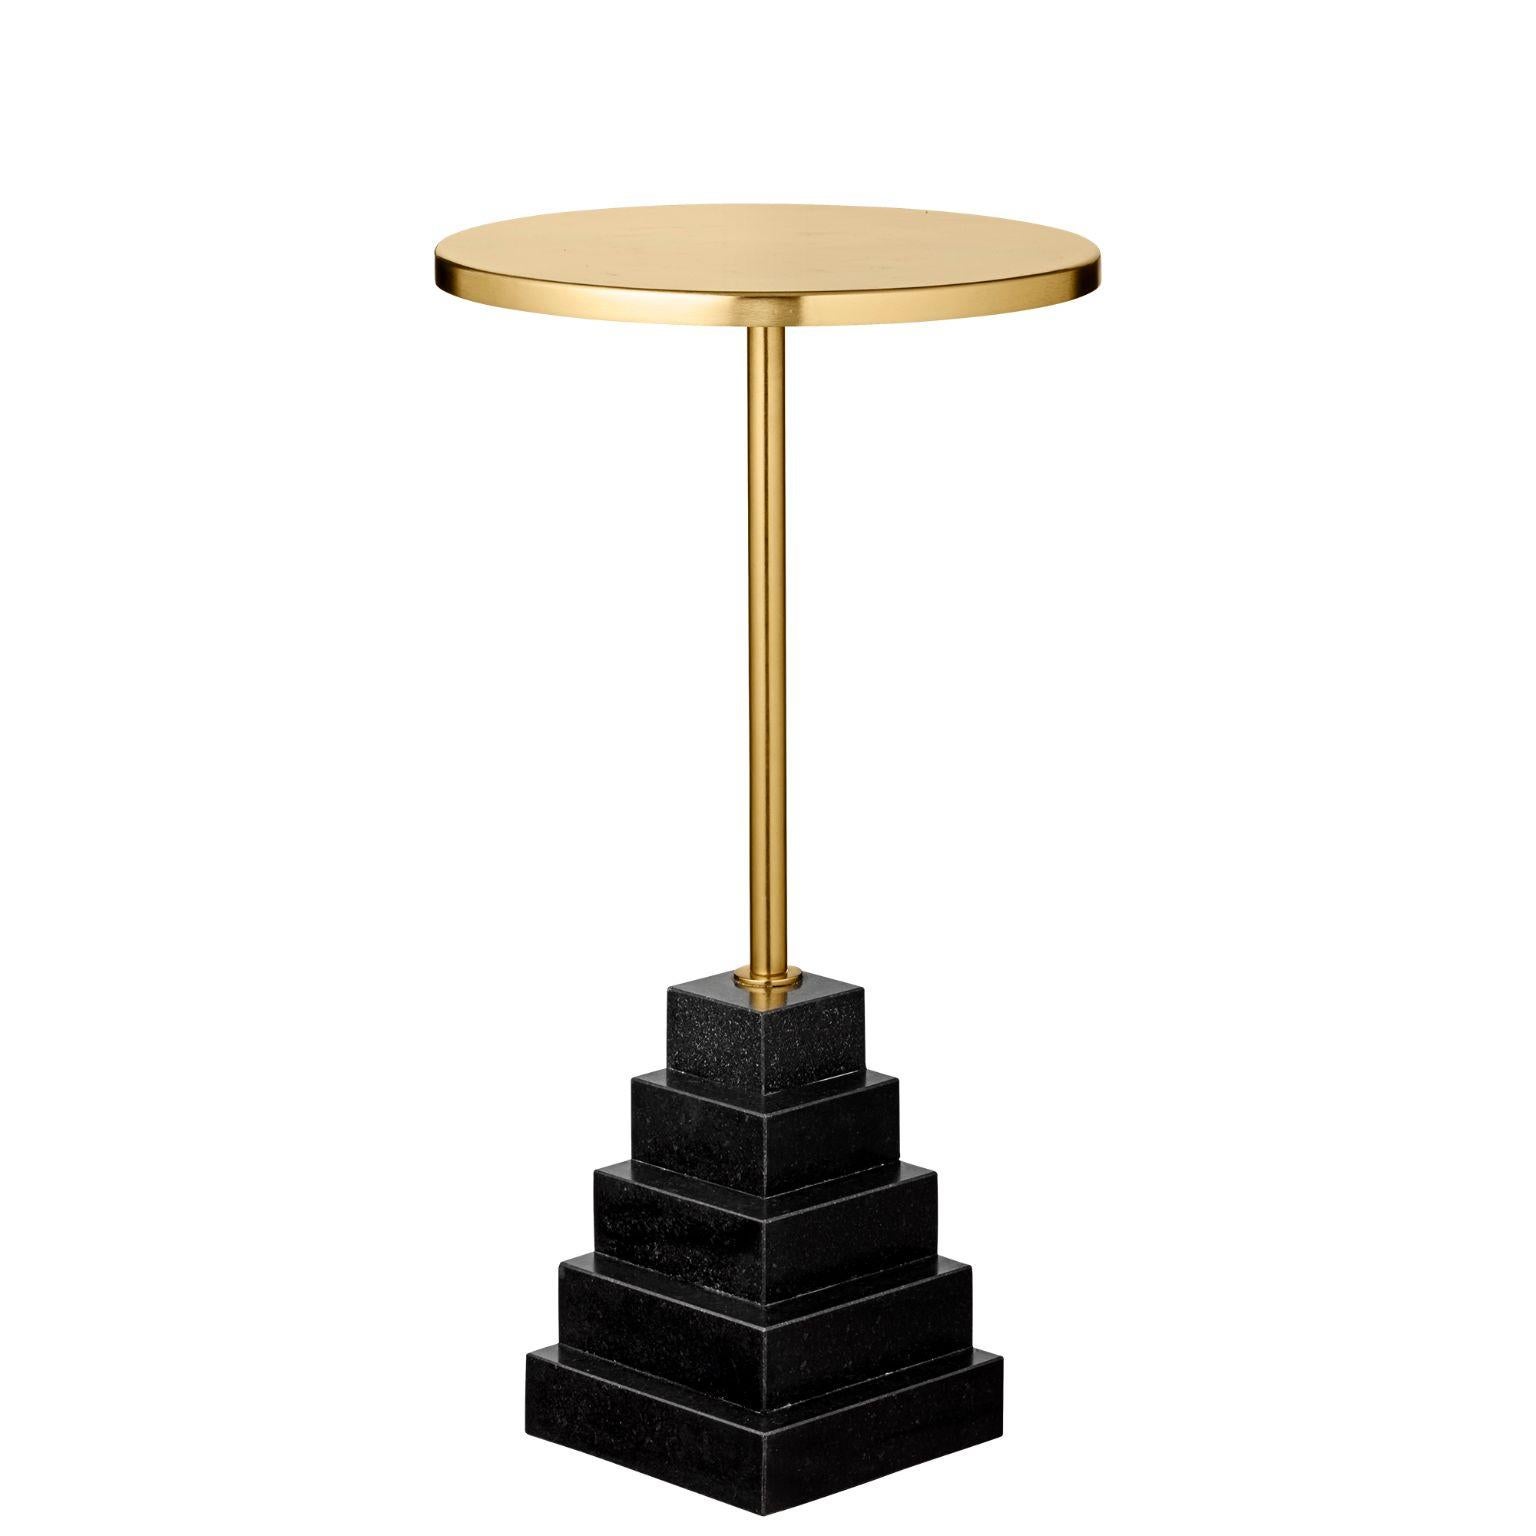 Granite and steel gold side table
Dimensions: Ø 32 x H 55 CM
Materials: Steel, granite base

The unique shape will make them stand out in any room in the home and truly appear as pieces of art. The tables are made of a foot in marble or granite